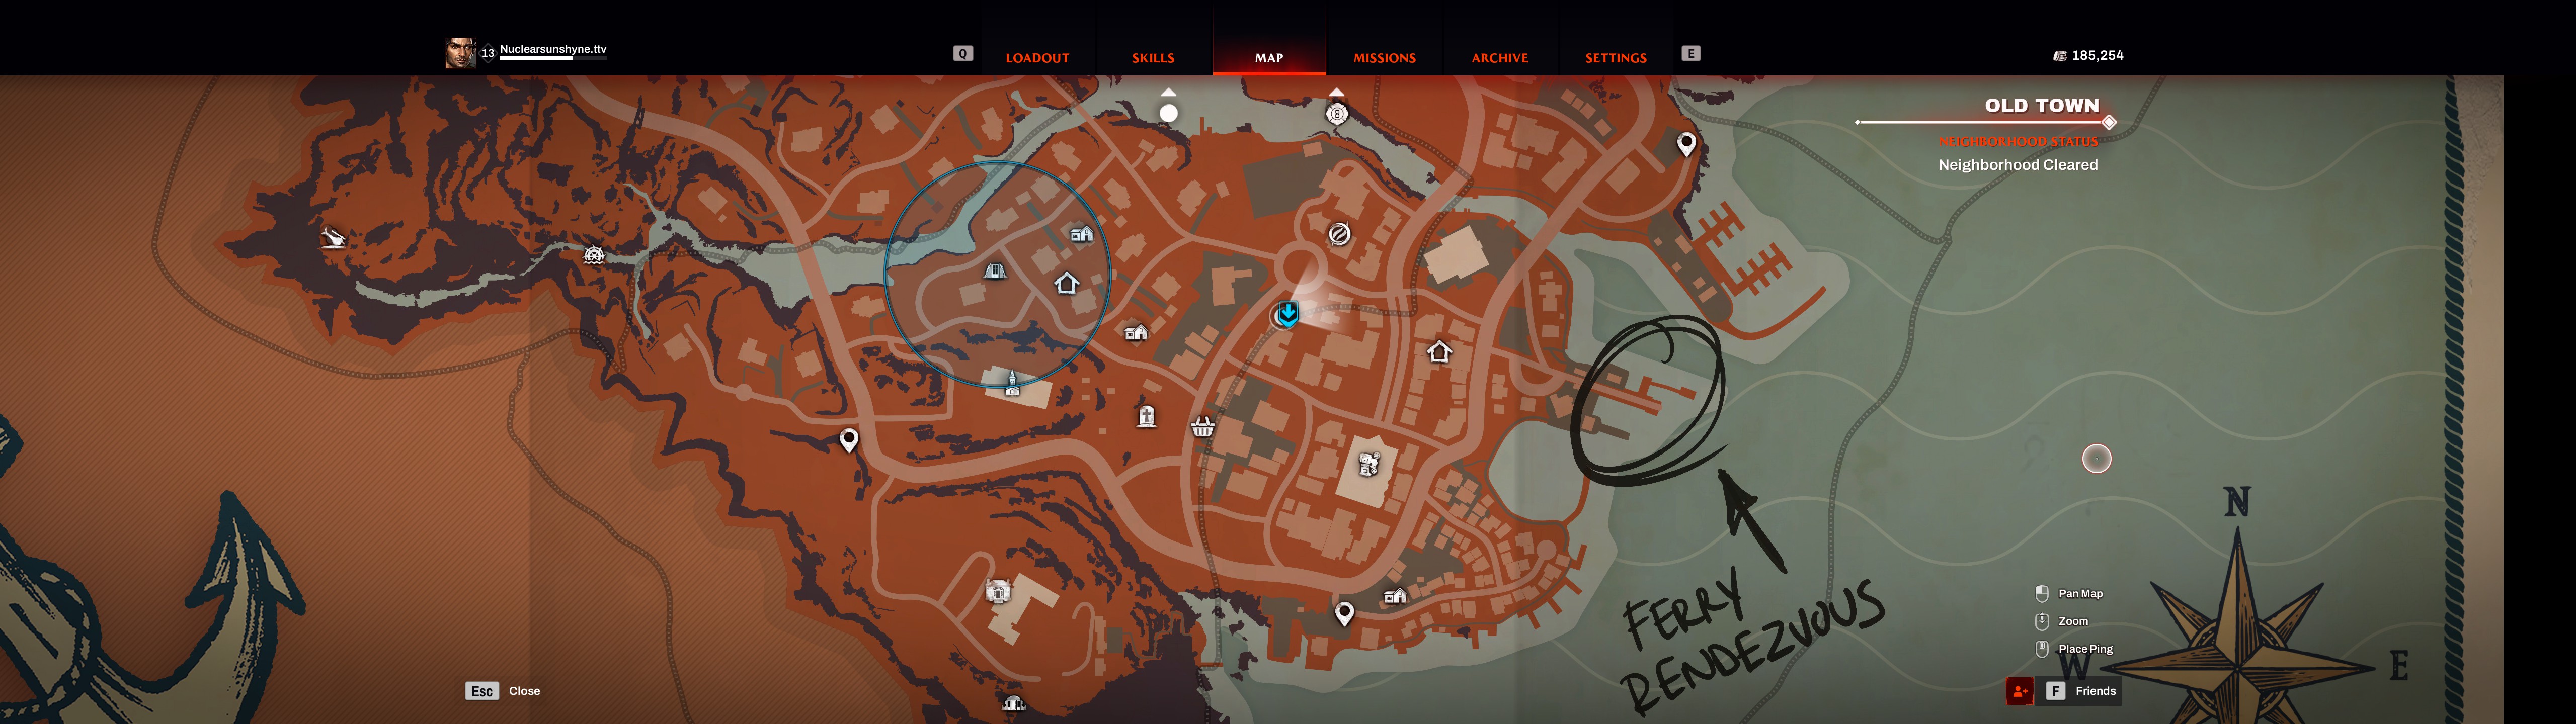 Redfall - Grave lock collectibles locations - Redfall Commons - B9BE5CA